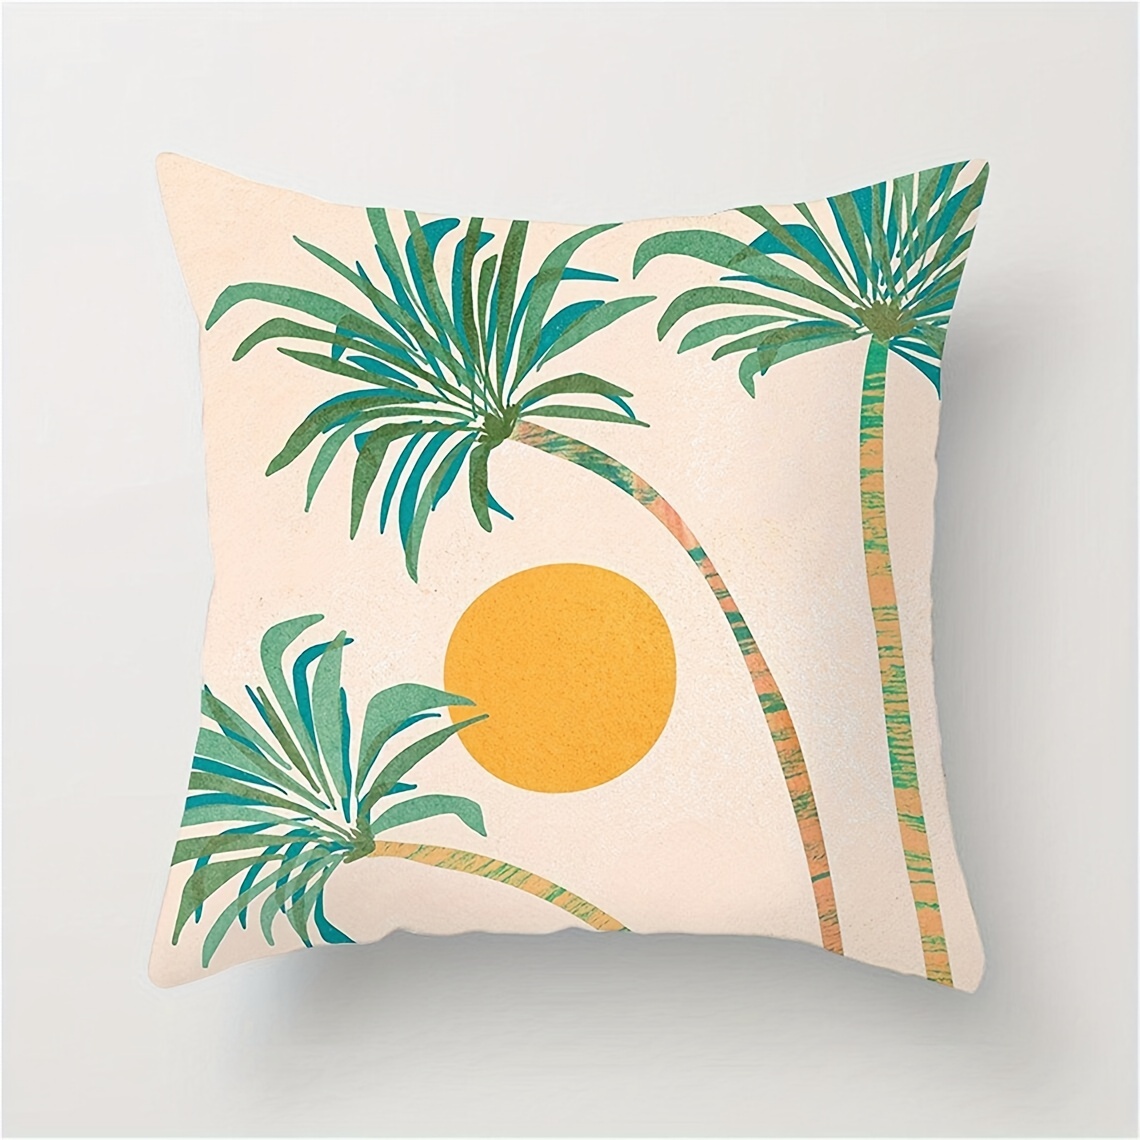 Abstract Oil Painting Cushion Cover Nordic Style Polyester Pillow